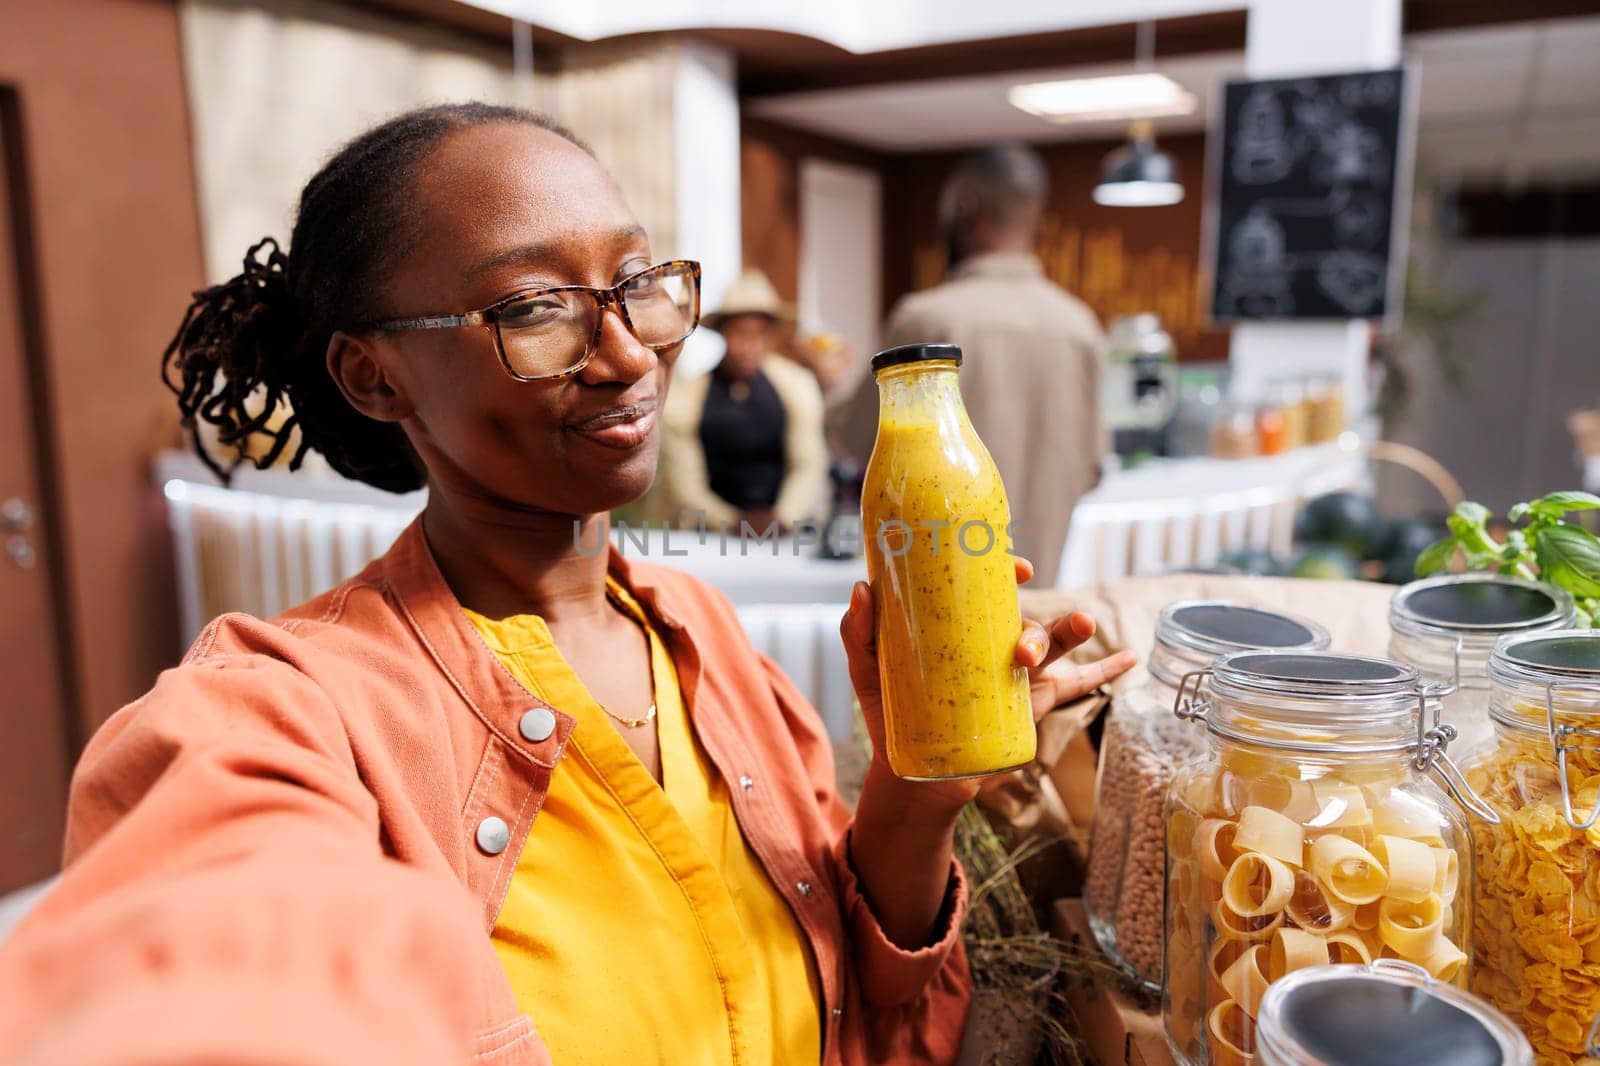 A young black woman films herself in a zero-waste shop promoting eco friendly grocery shopping. She highlights fresh, homegrown products and engages her online audience through vlogging.